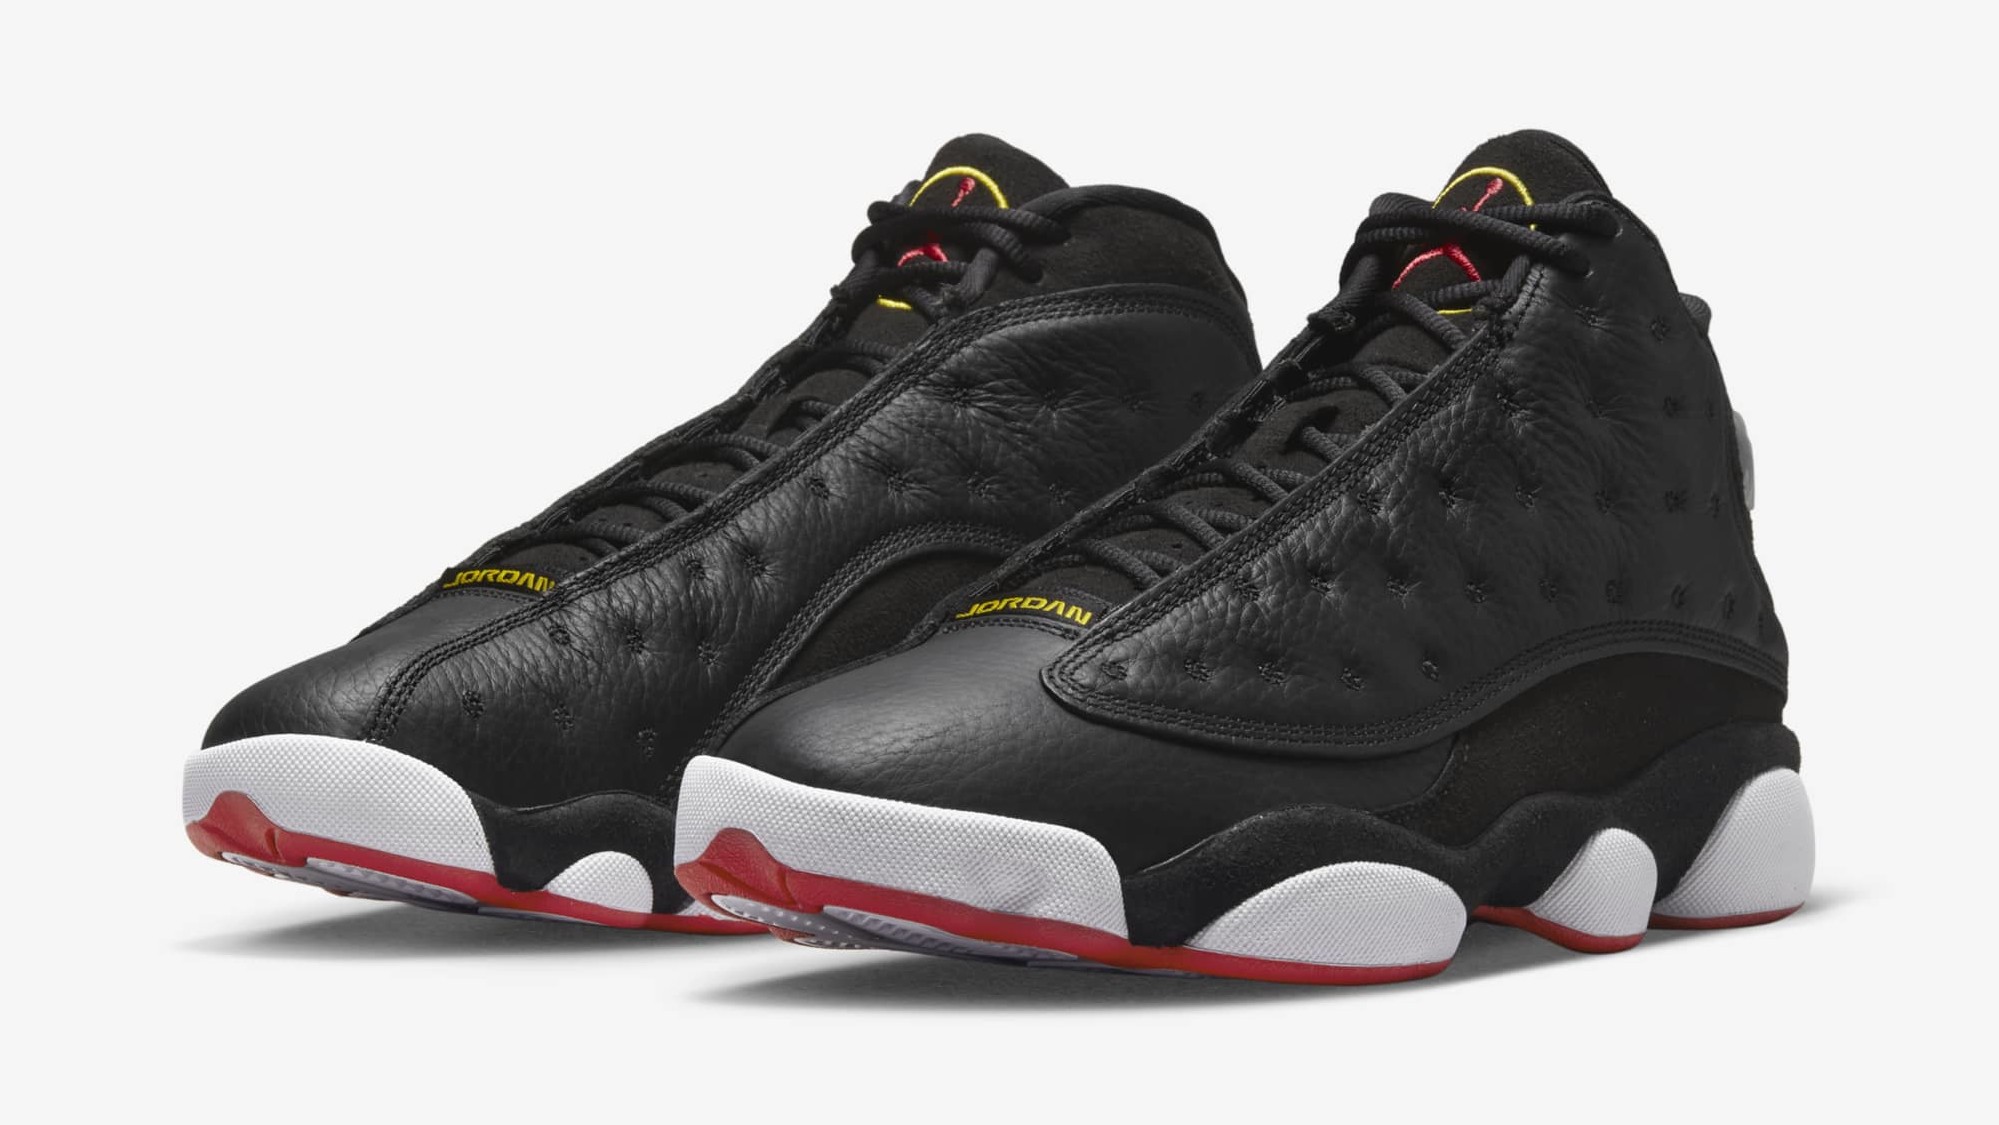 Another Look at the Air Jordan 13 Low Bred 